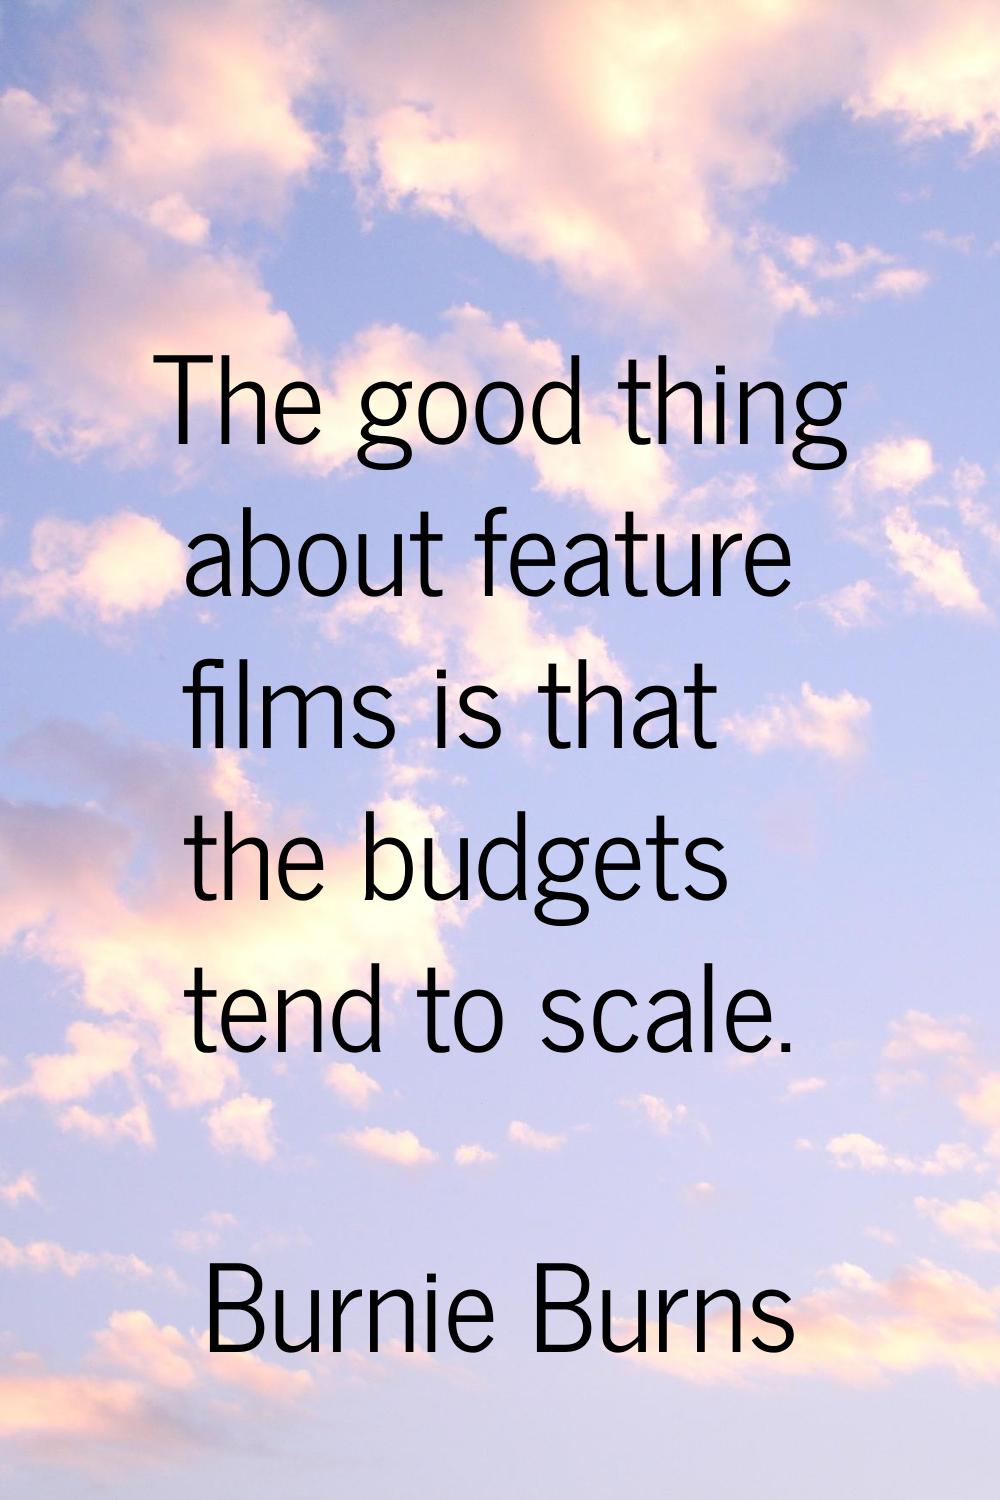 The good thing about feature films is that the budgets tend to scale.